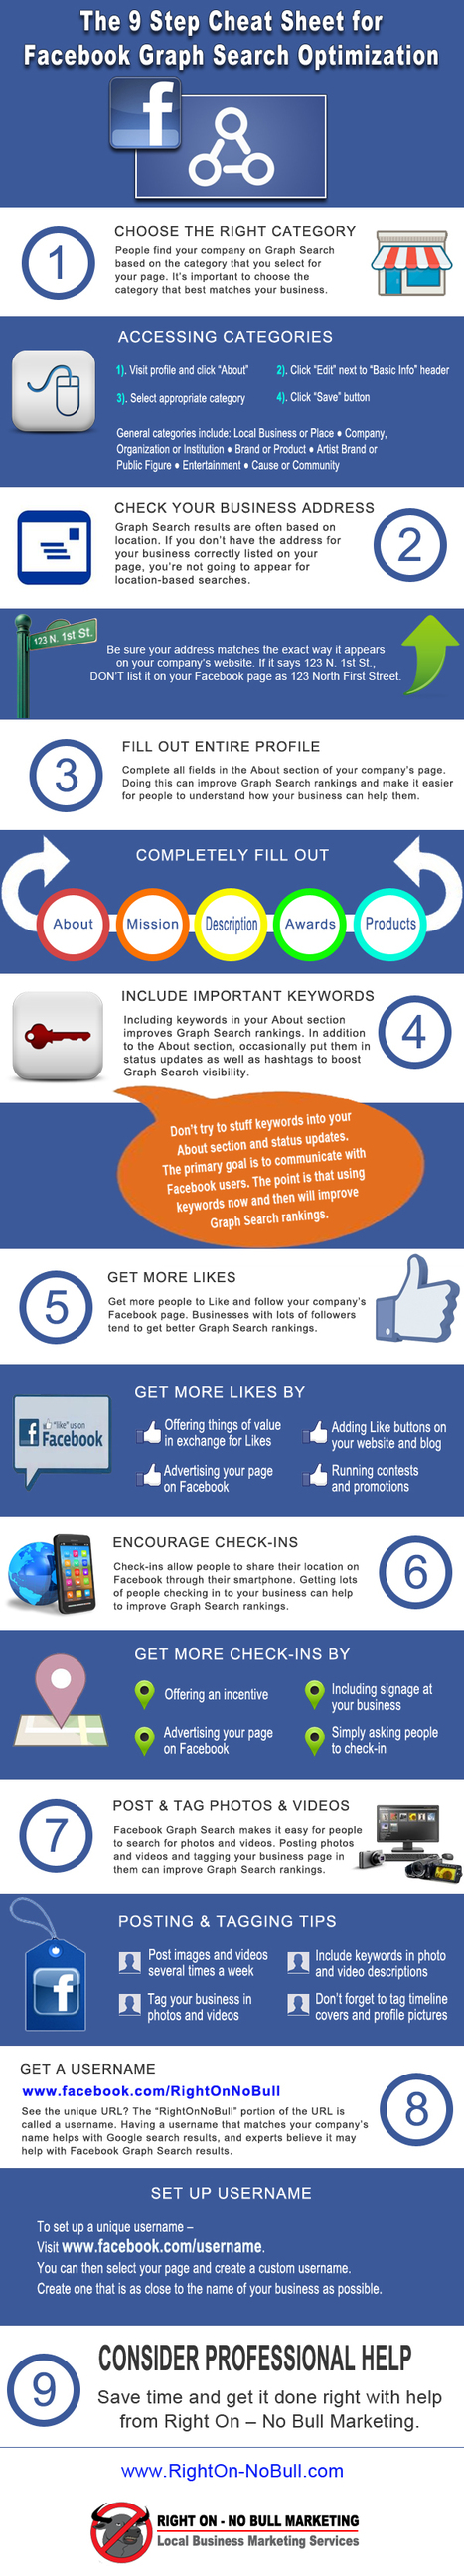 9 Steps for Facebook Graph Search Optimization [INFOGRAPHIC] | Better know and better use Social Media today (facebook, twitter...) | Scoop.it